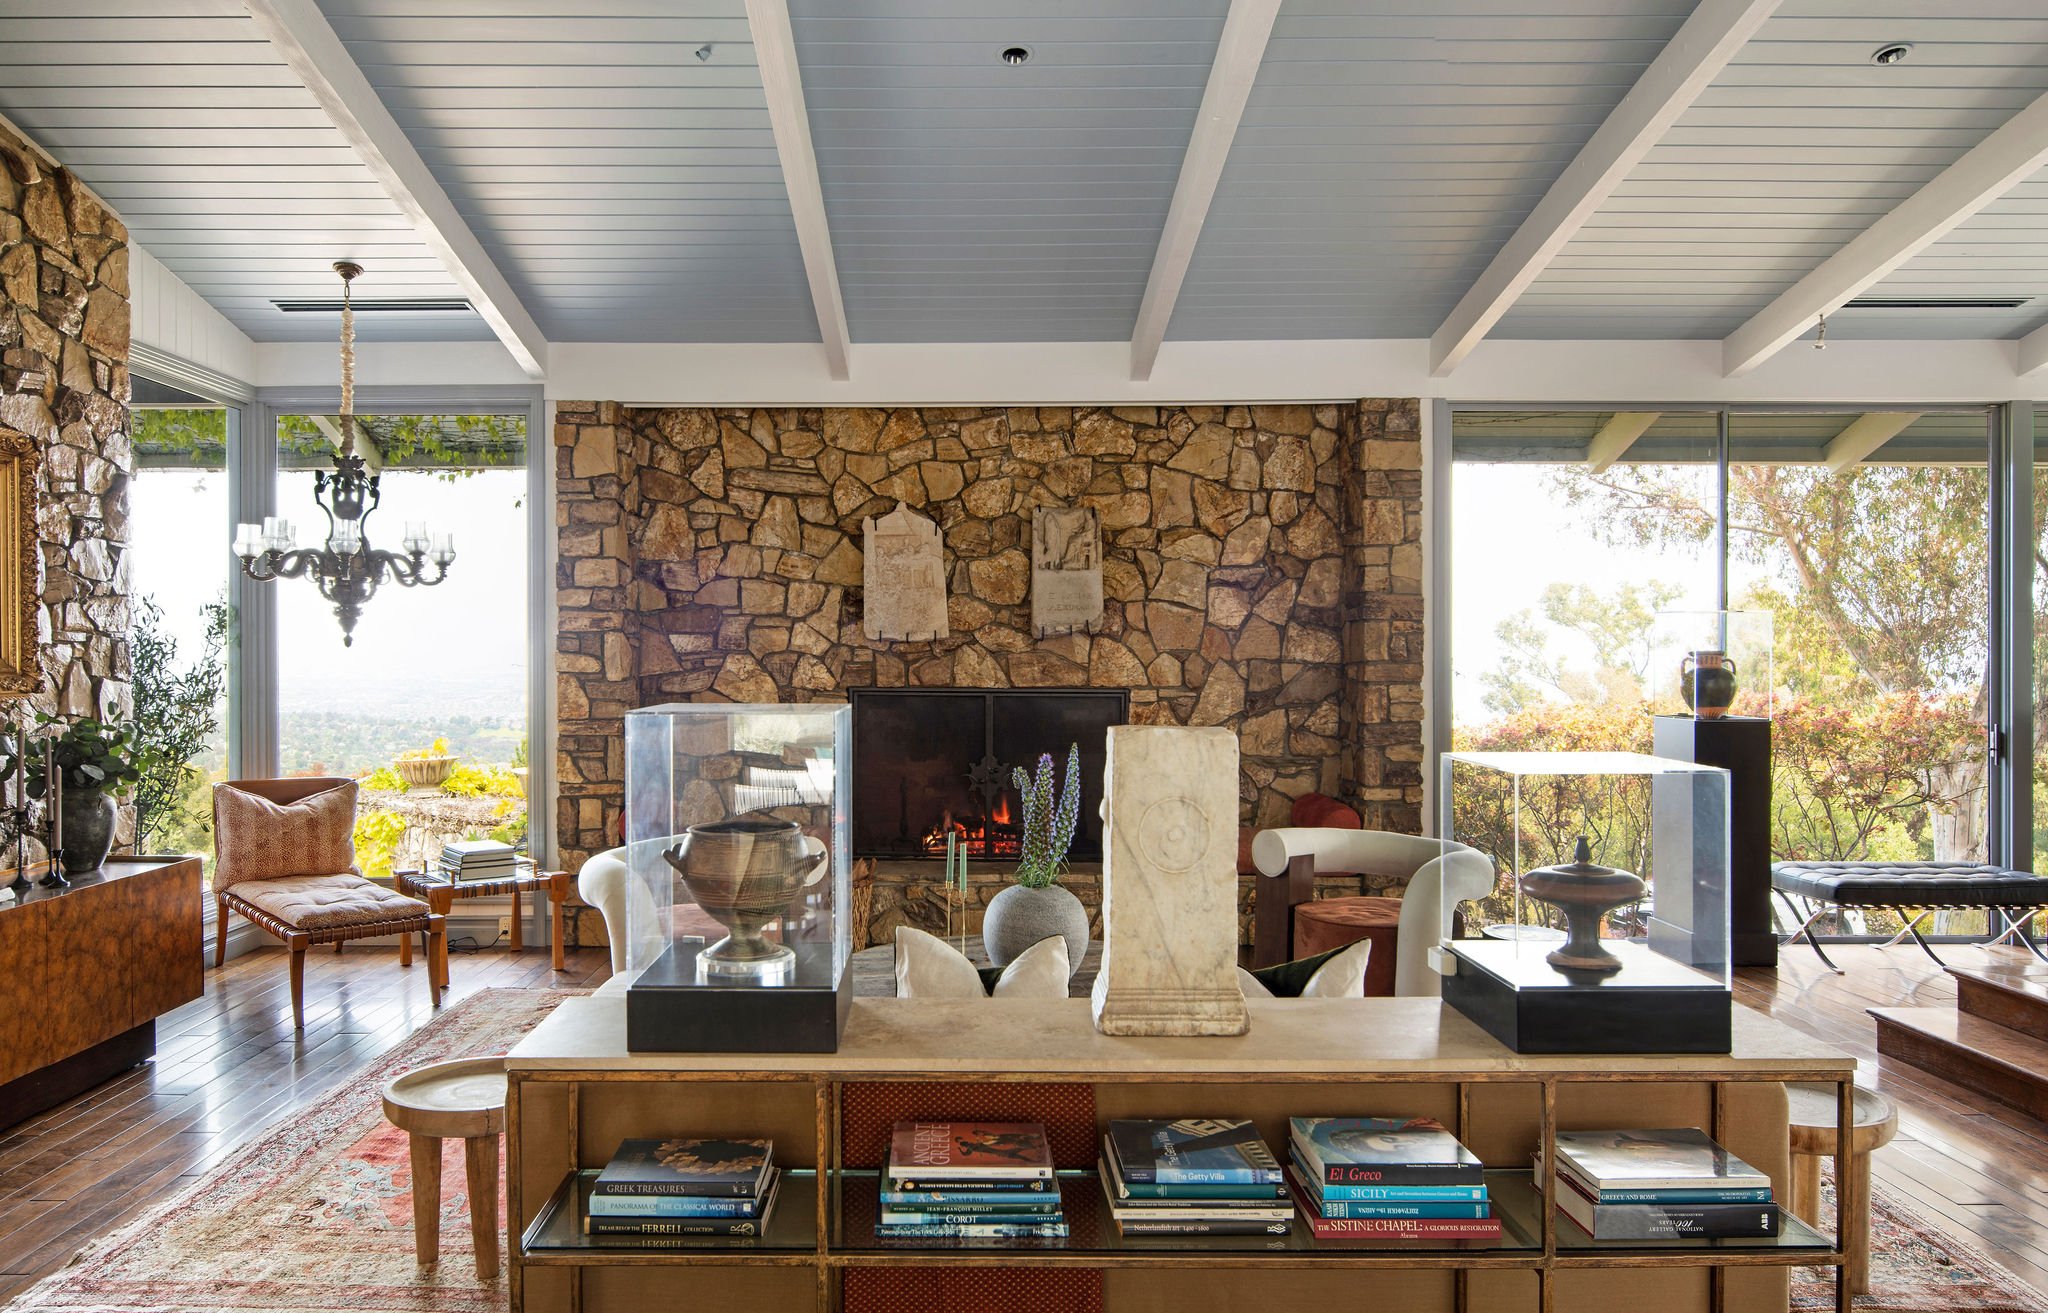 Francis York This Mid-Century Ranch with Award-Winning Vineyards is a ‘House of Dreams’ in Palos Verdes, California 14.jpg